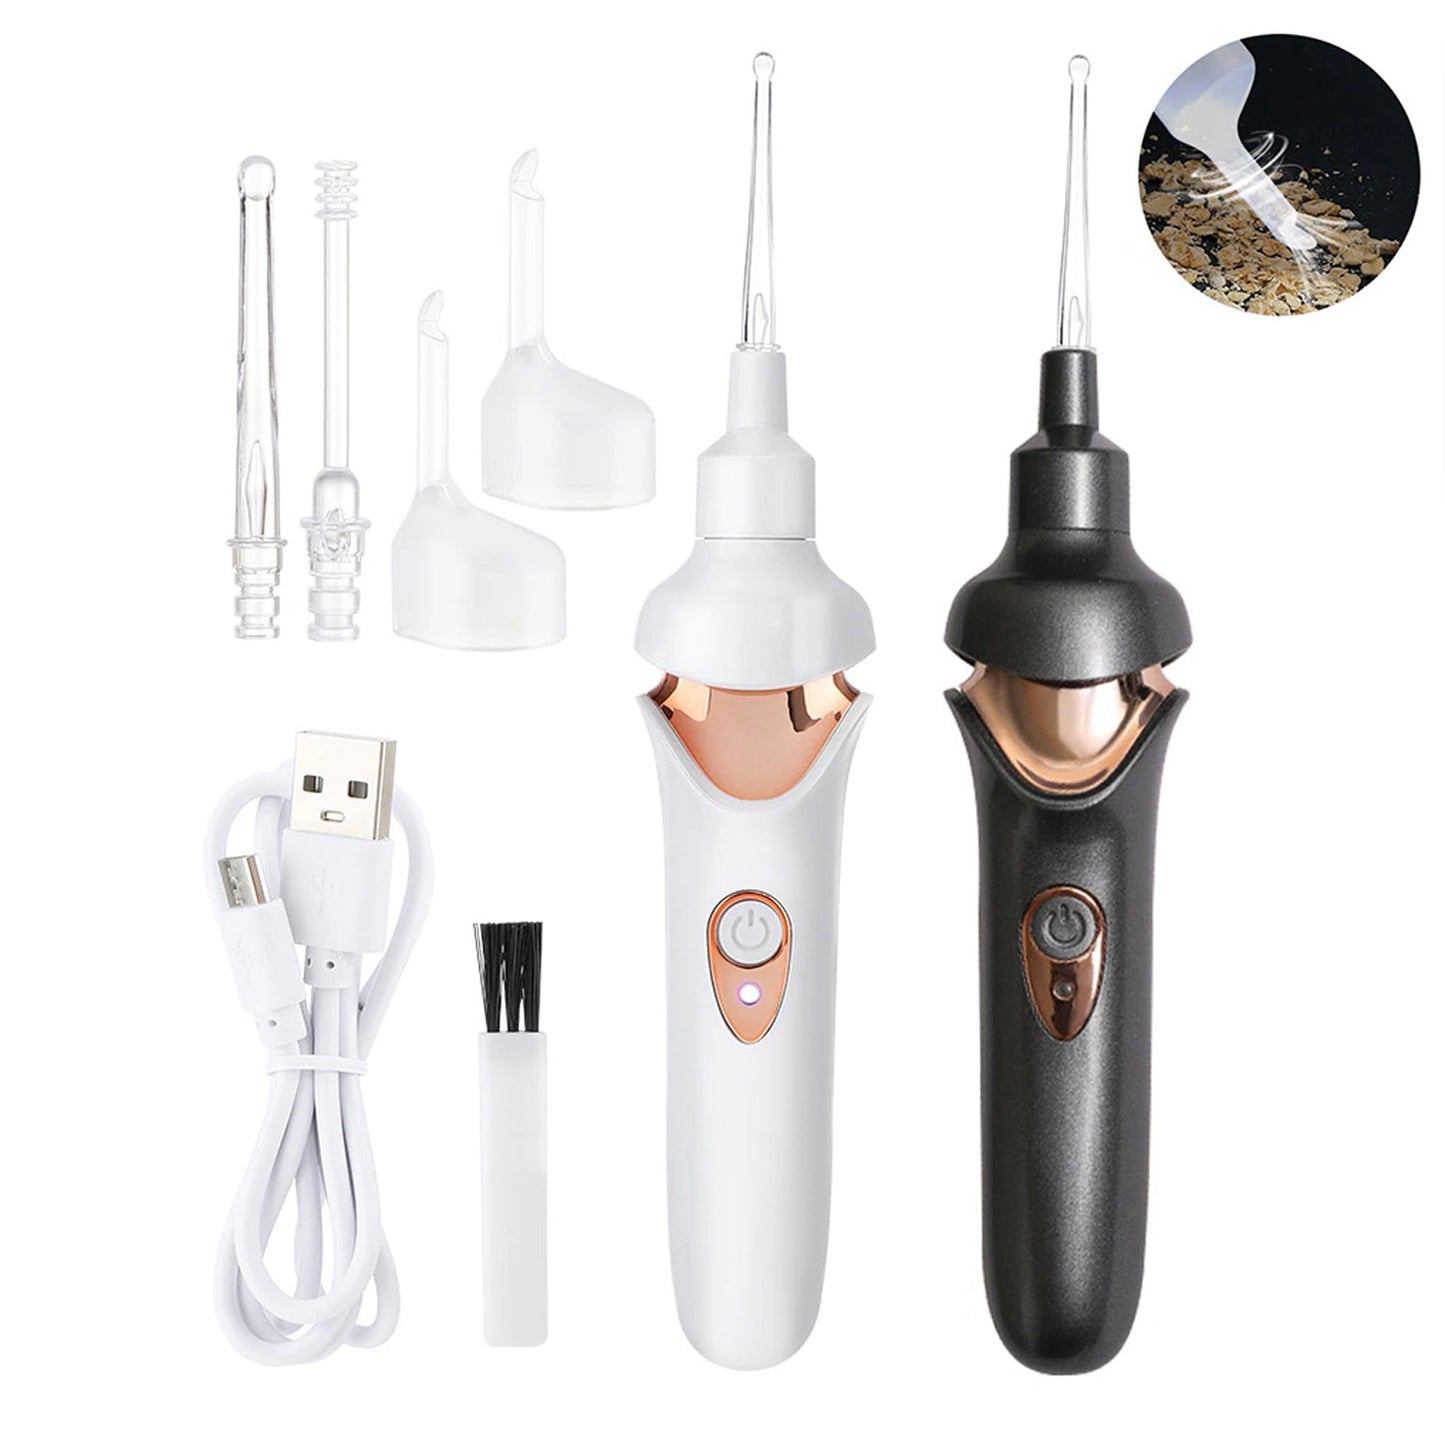 7707 EAR SUCTION DEVICE, PORTABLE COMFORTABLE EFFICIENT AUTOMATIC ELECTRIC VACUUM SOFT EAR PICK EAR CLEANER EASY EARWAX REMOVER SOFT PREVENT EAR-PICK CLEAN TOOLS SET FOR ADULTS KIDS - SWASTIK CREATIONS The Trend Point SWASTIK CREATIONS The Trend Point